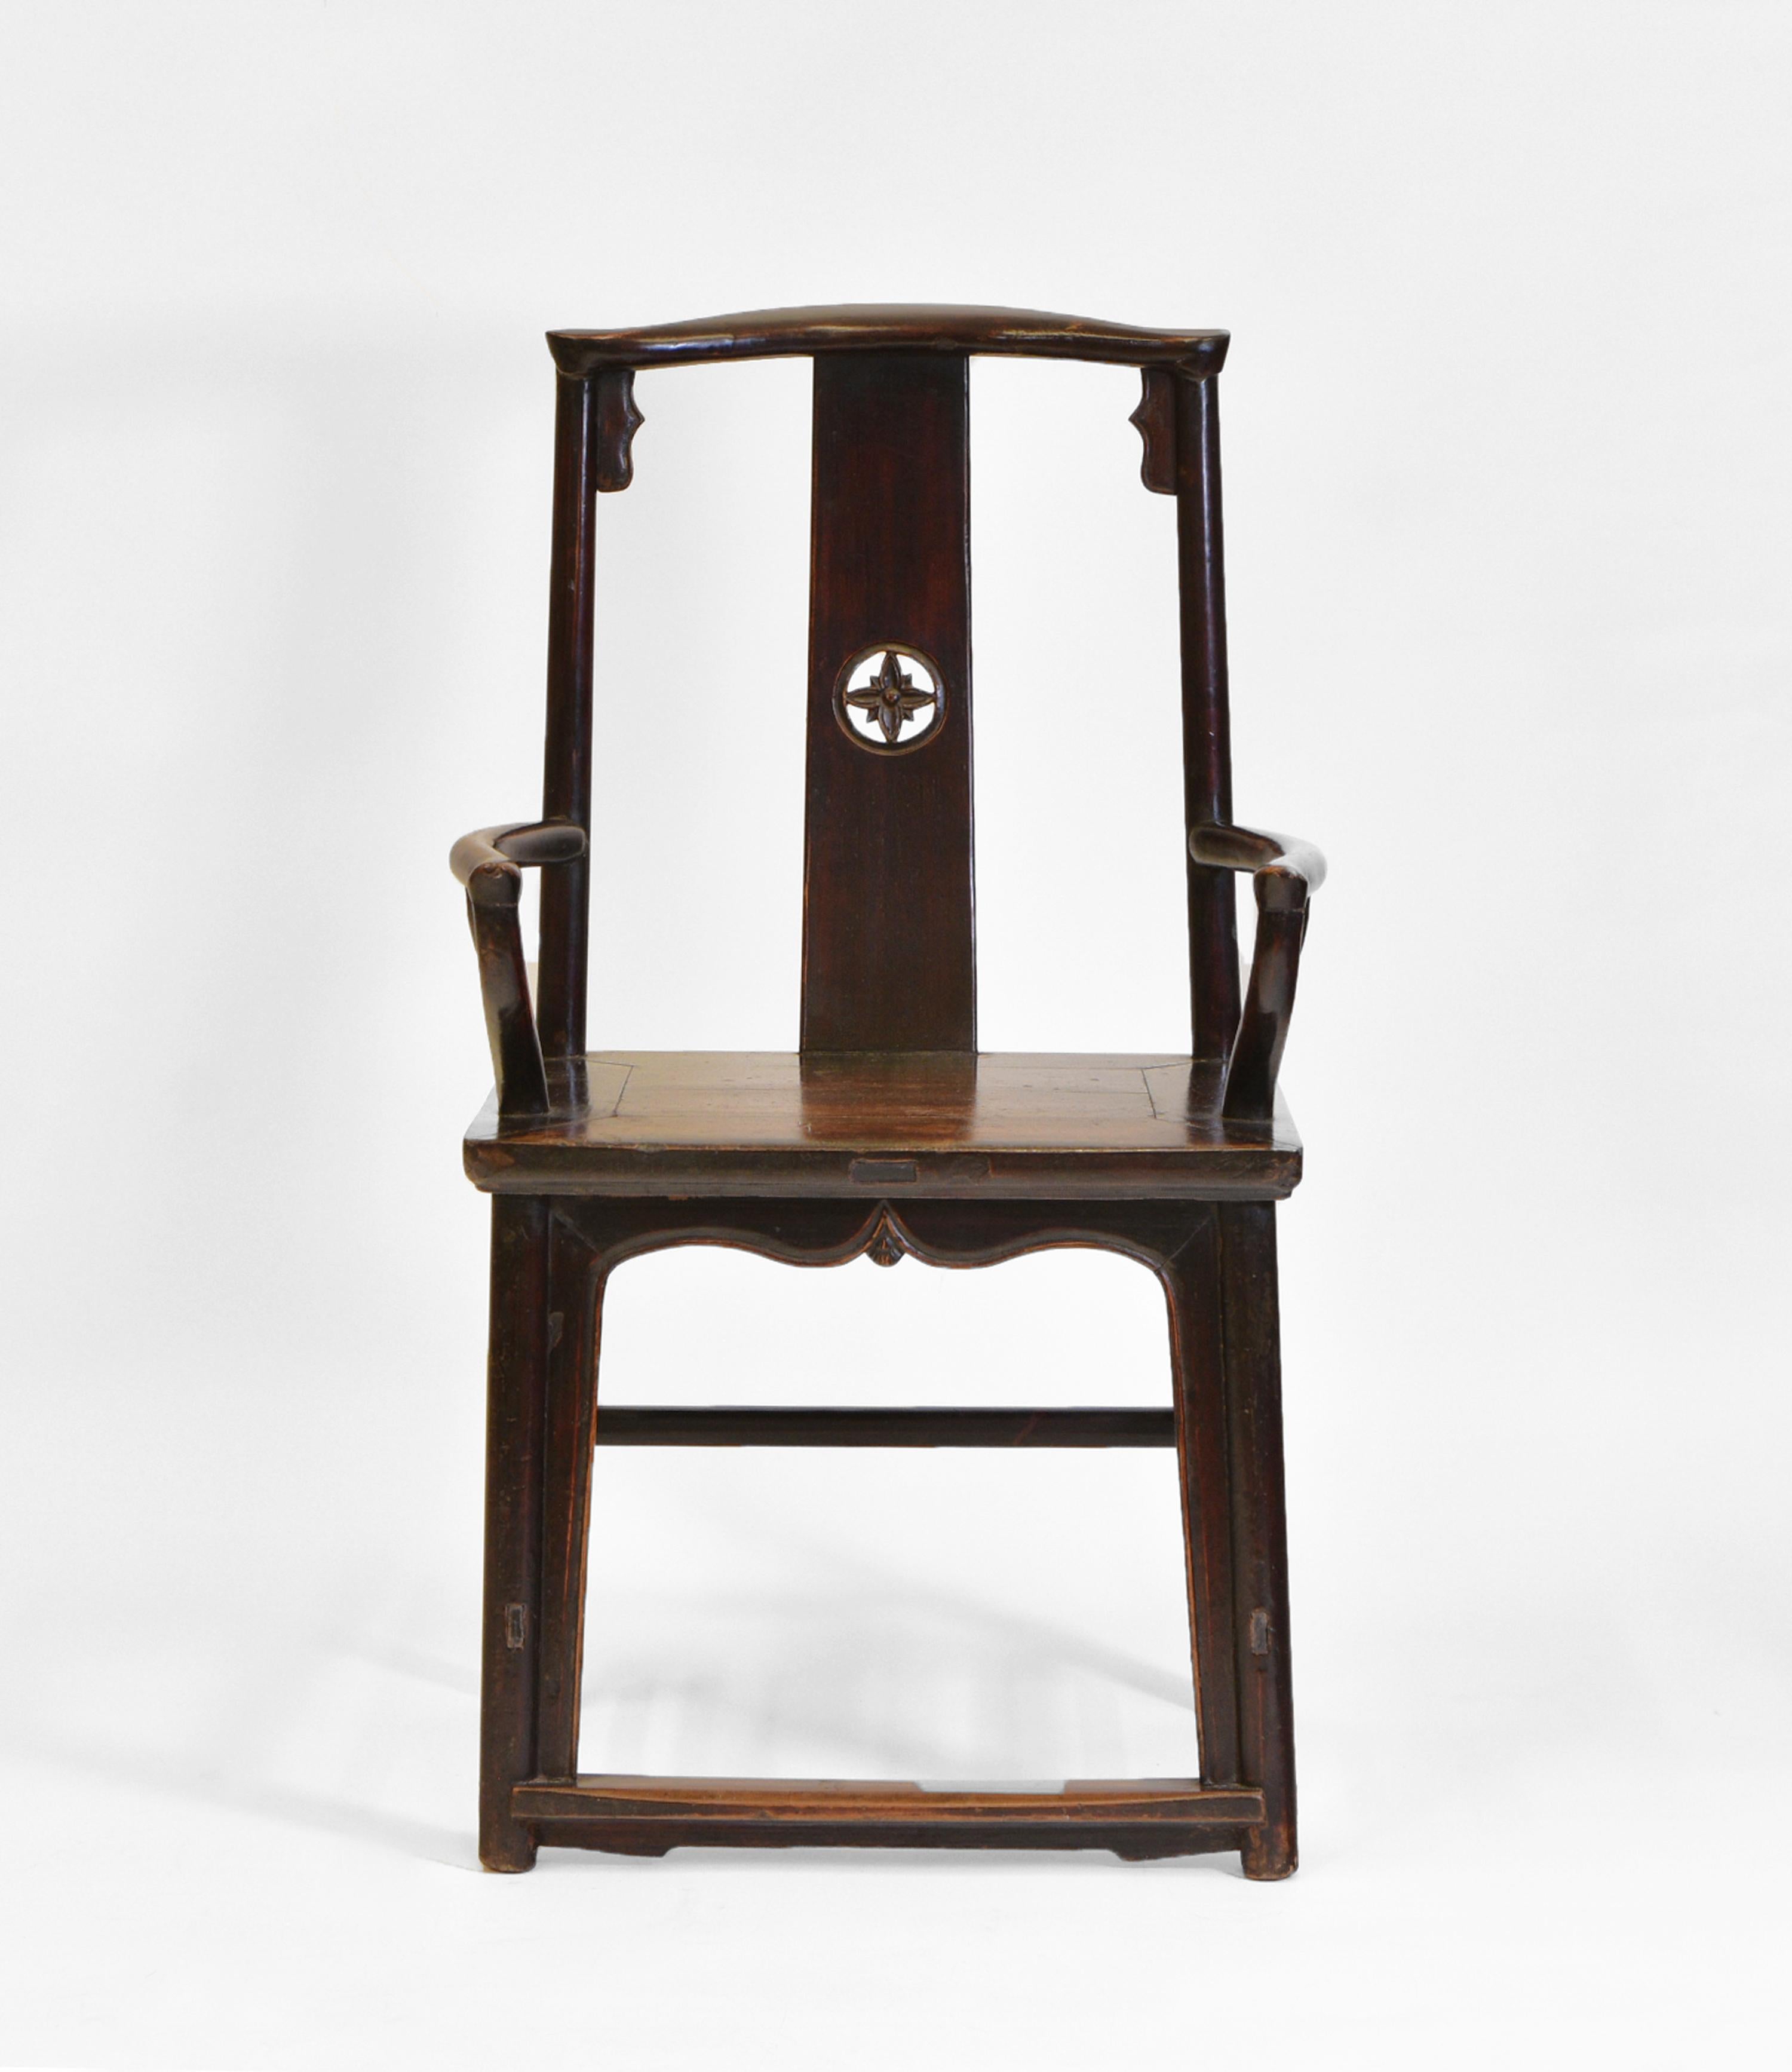 An antique Chinese open hardwood armchair. Circa 1880.

The chair shows good patina and age related wear to the finish. An upright design with an arched splat following the curve of the spine. Decorative apron under the seat leading down to the